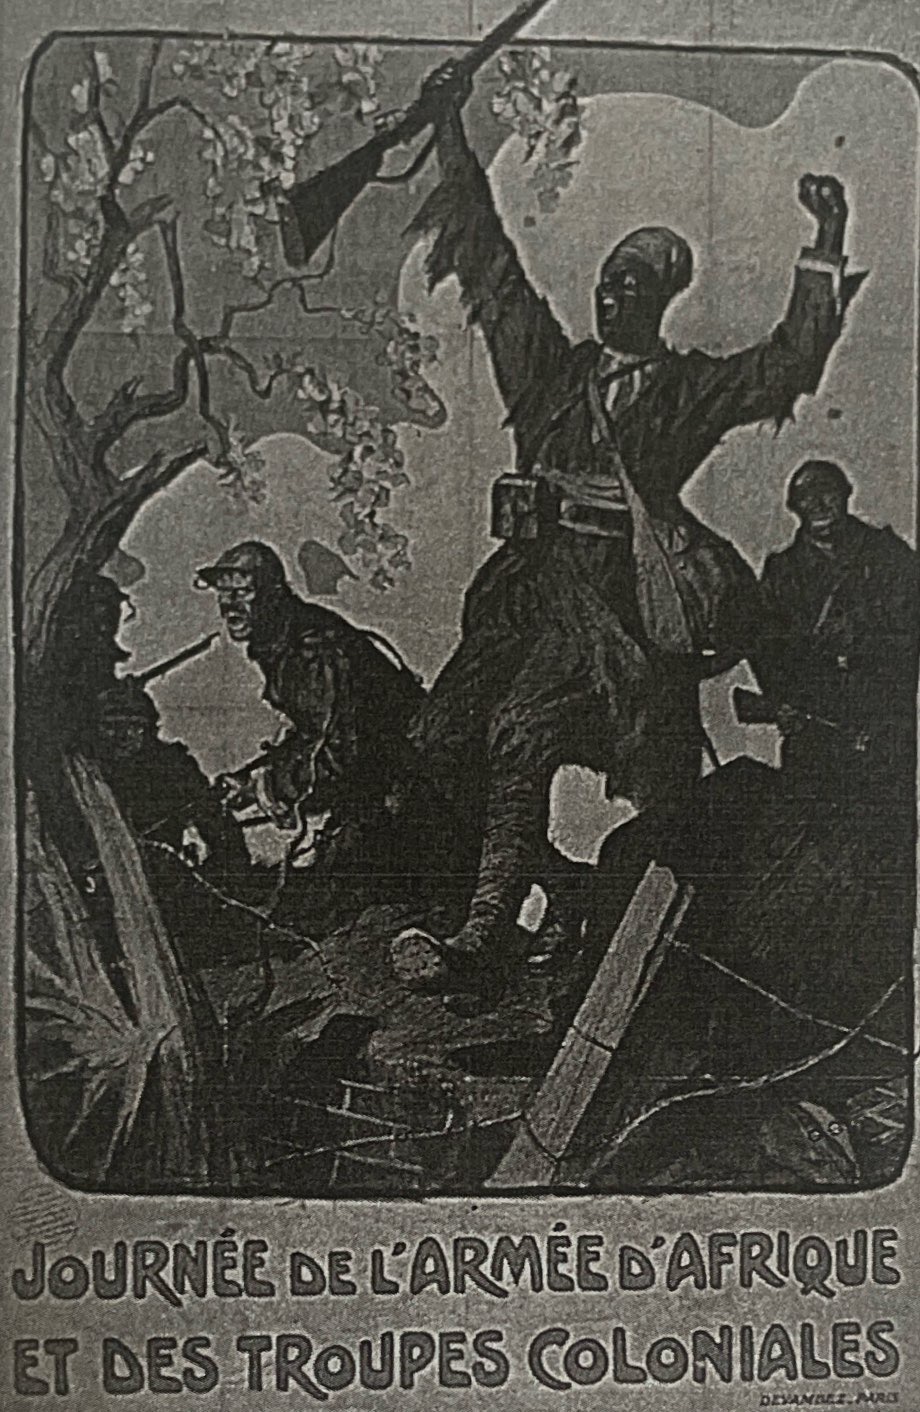 <p><strong>11-1.</strong> What does the French poster with the caption that reads “Day of the African Army and Colonial Troops“ suggest about the role of North and West Africans in World War I?</p><p>a) They fought for France<br>b) They rebelled against France<br>c) They aided Germany<br>d) They sided with the Central Powers</p>